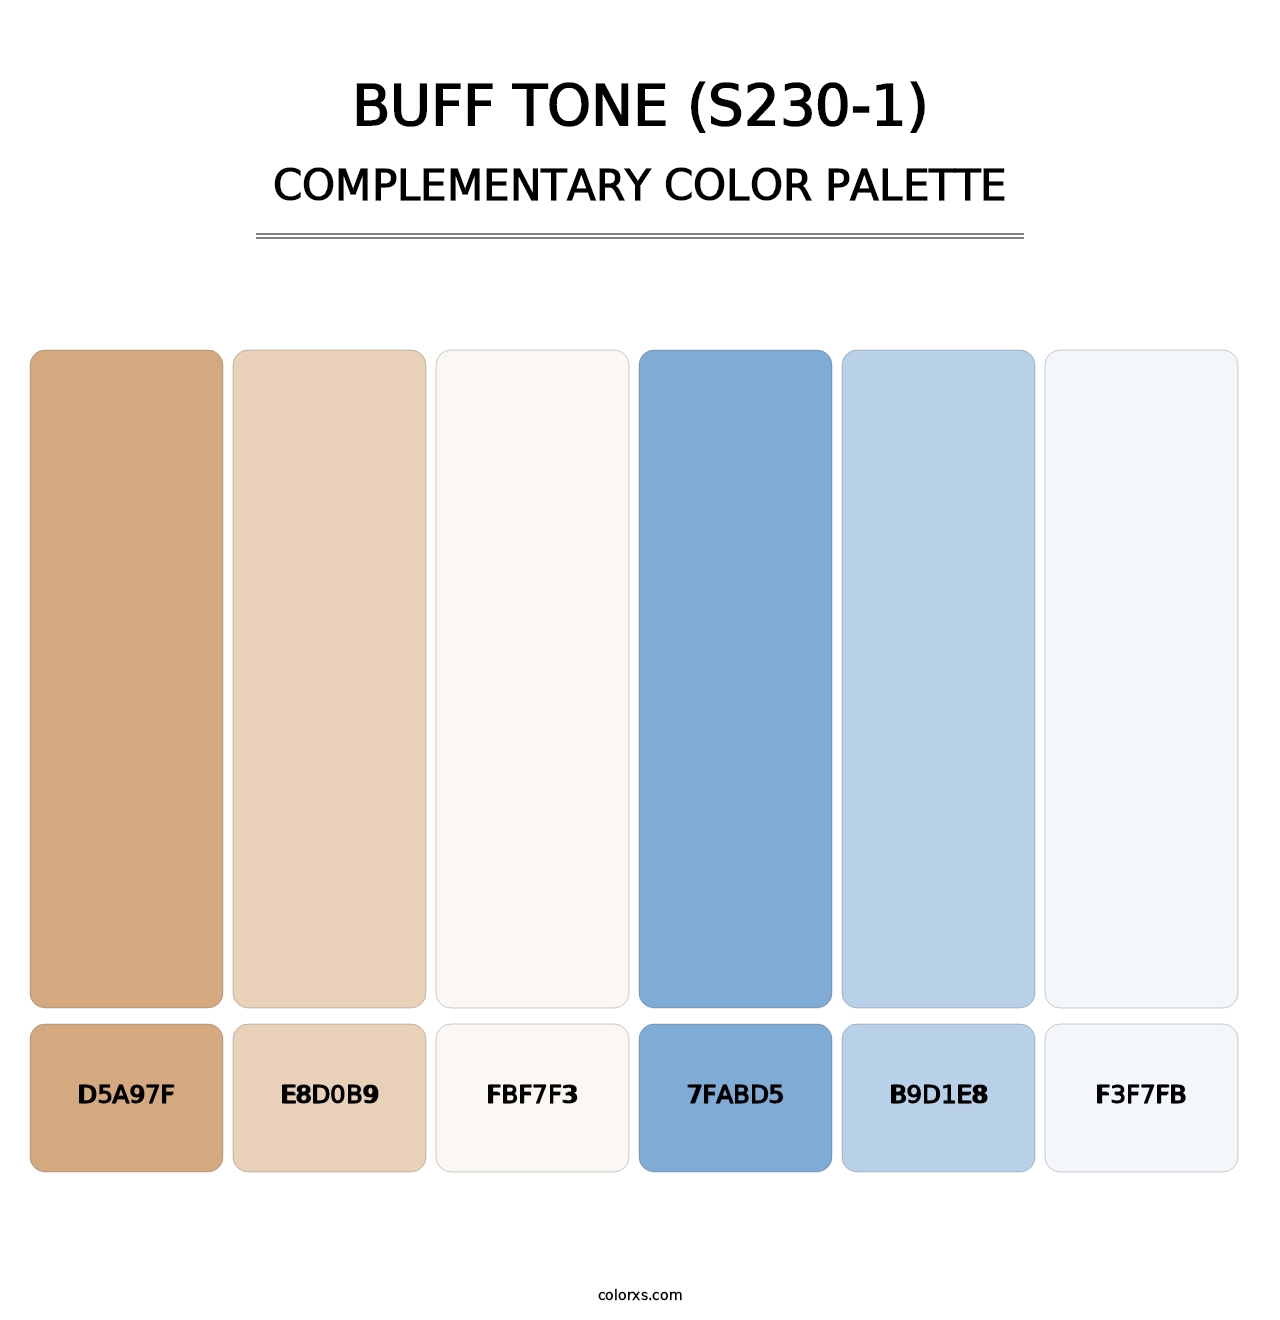 Buff Tone (S230-1) - Complementary Color Palette